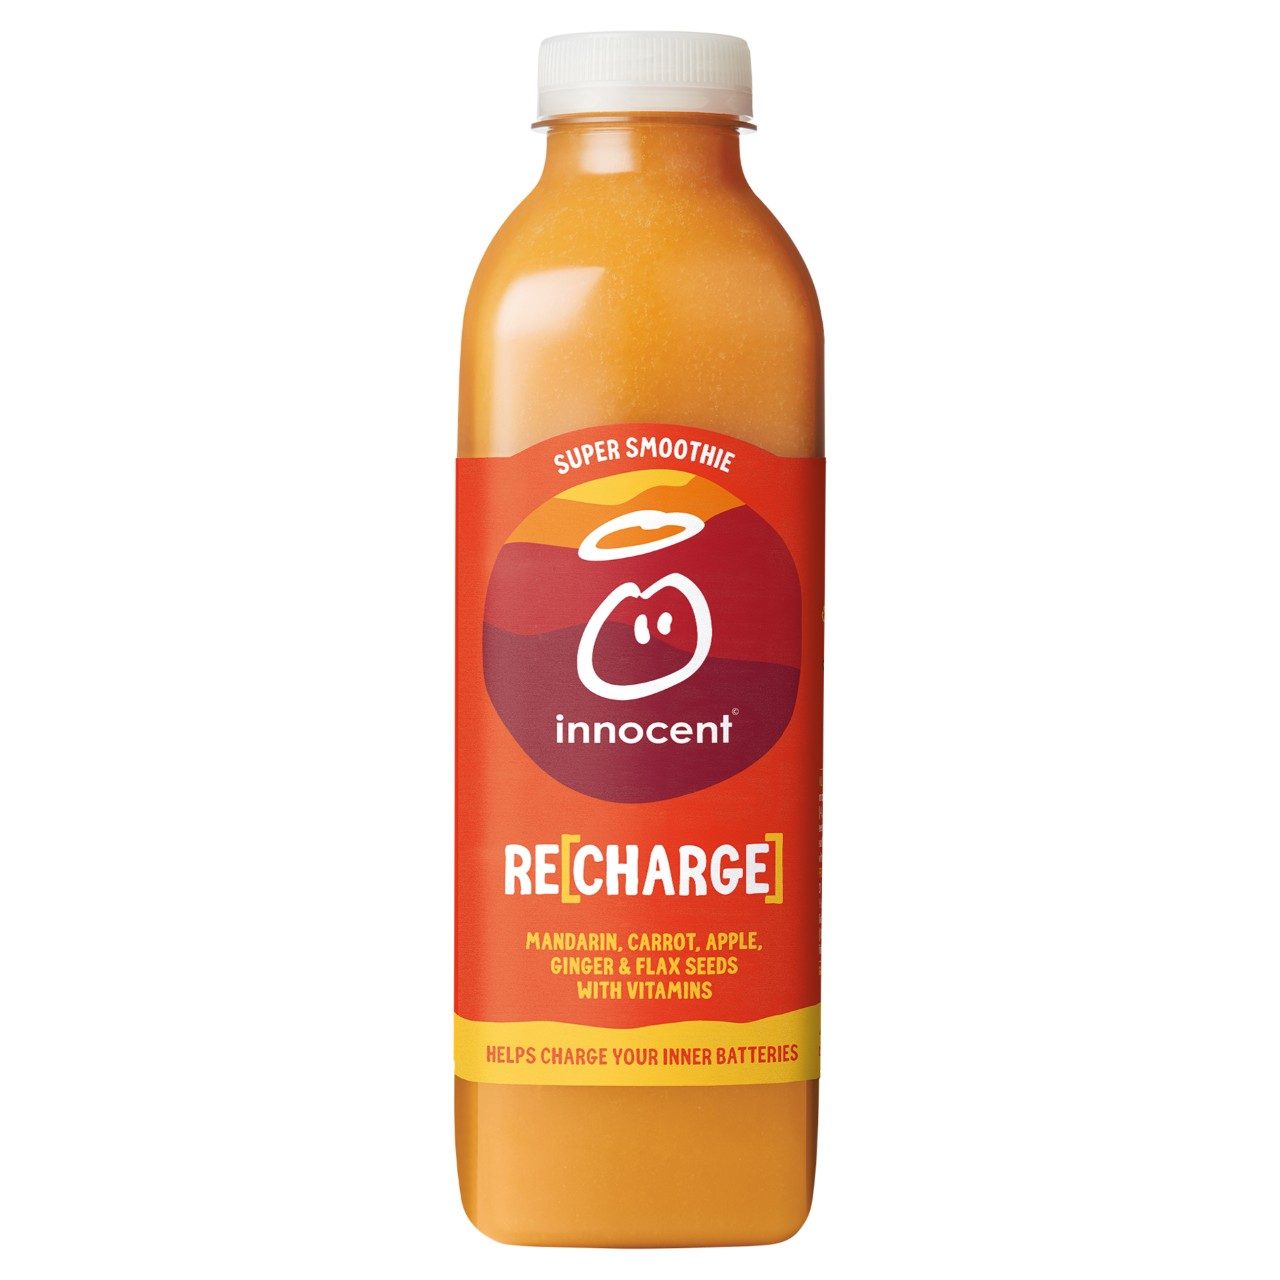 Super smoothie recharge